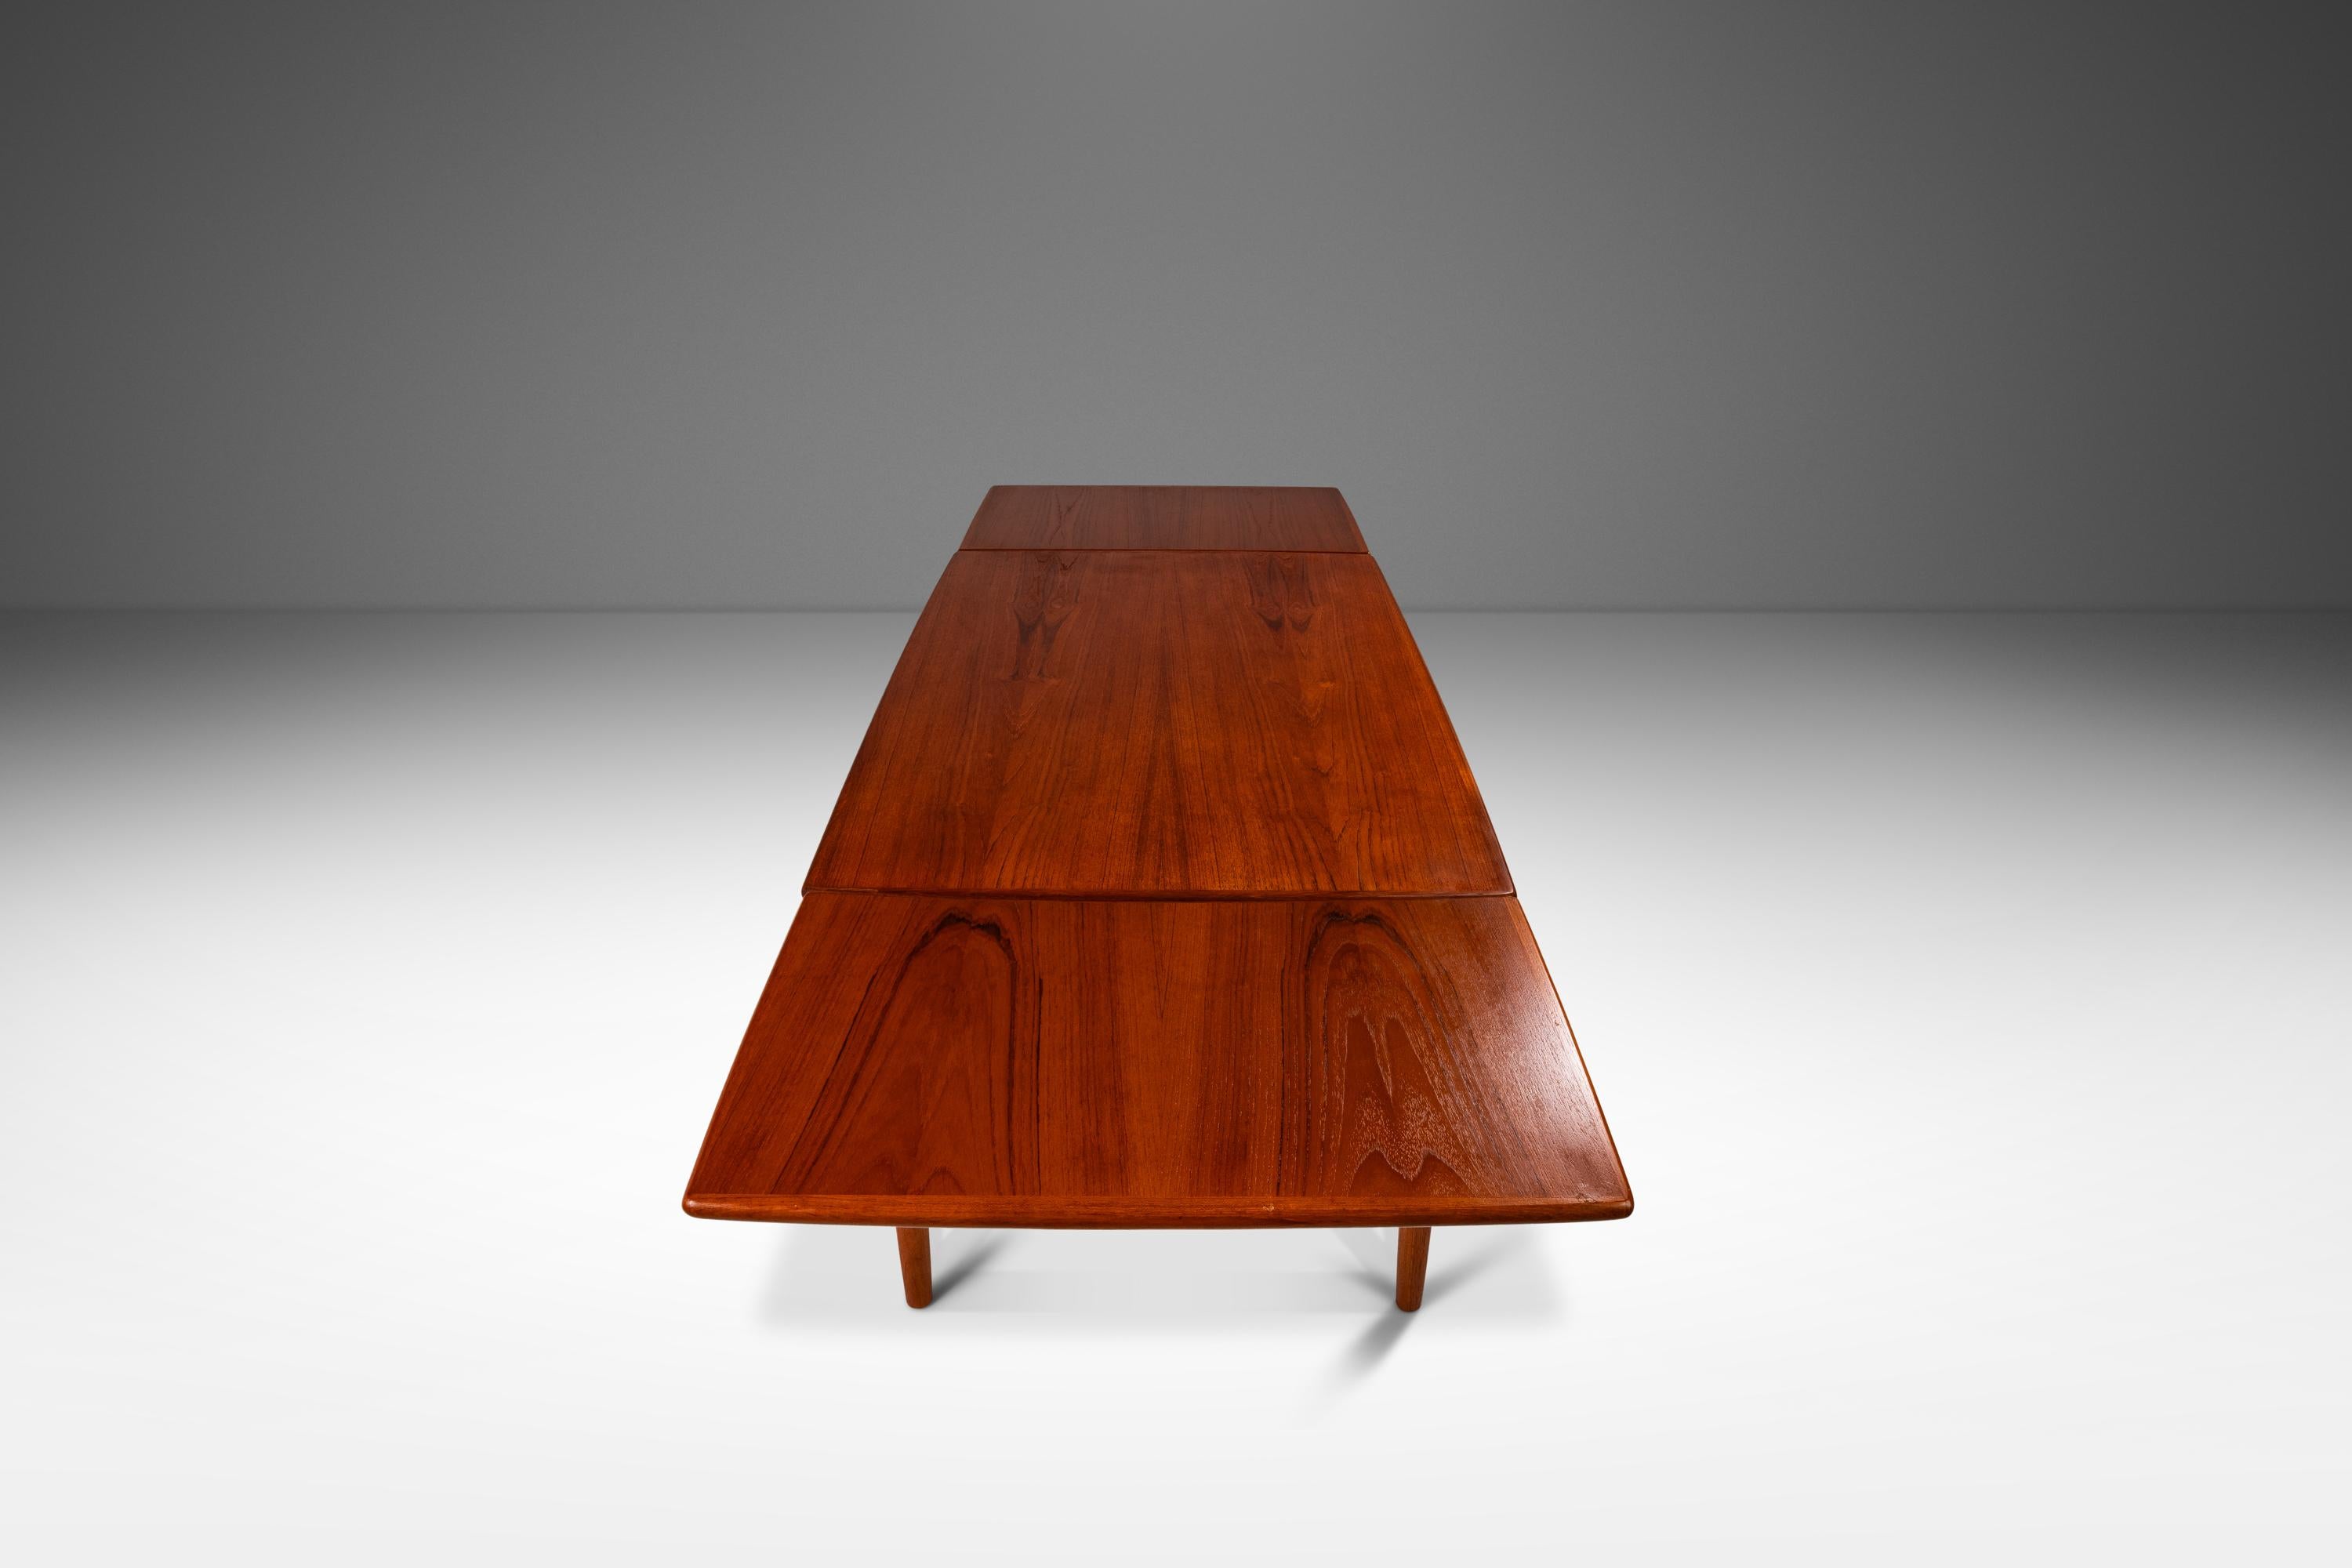 Danish Modern Expansion Dining Table in Teak w/ Stow-In-Table Leaves, c. 1960s For Sale 3